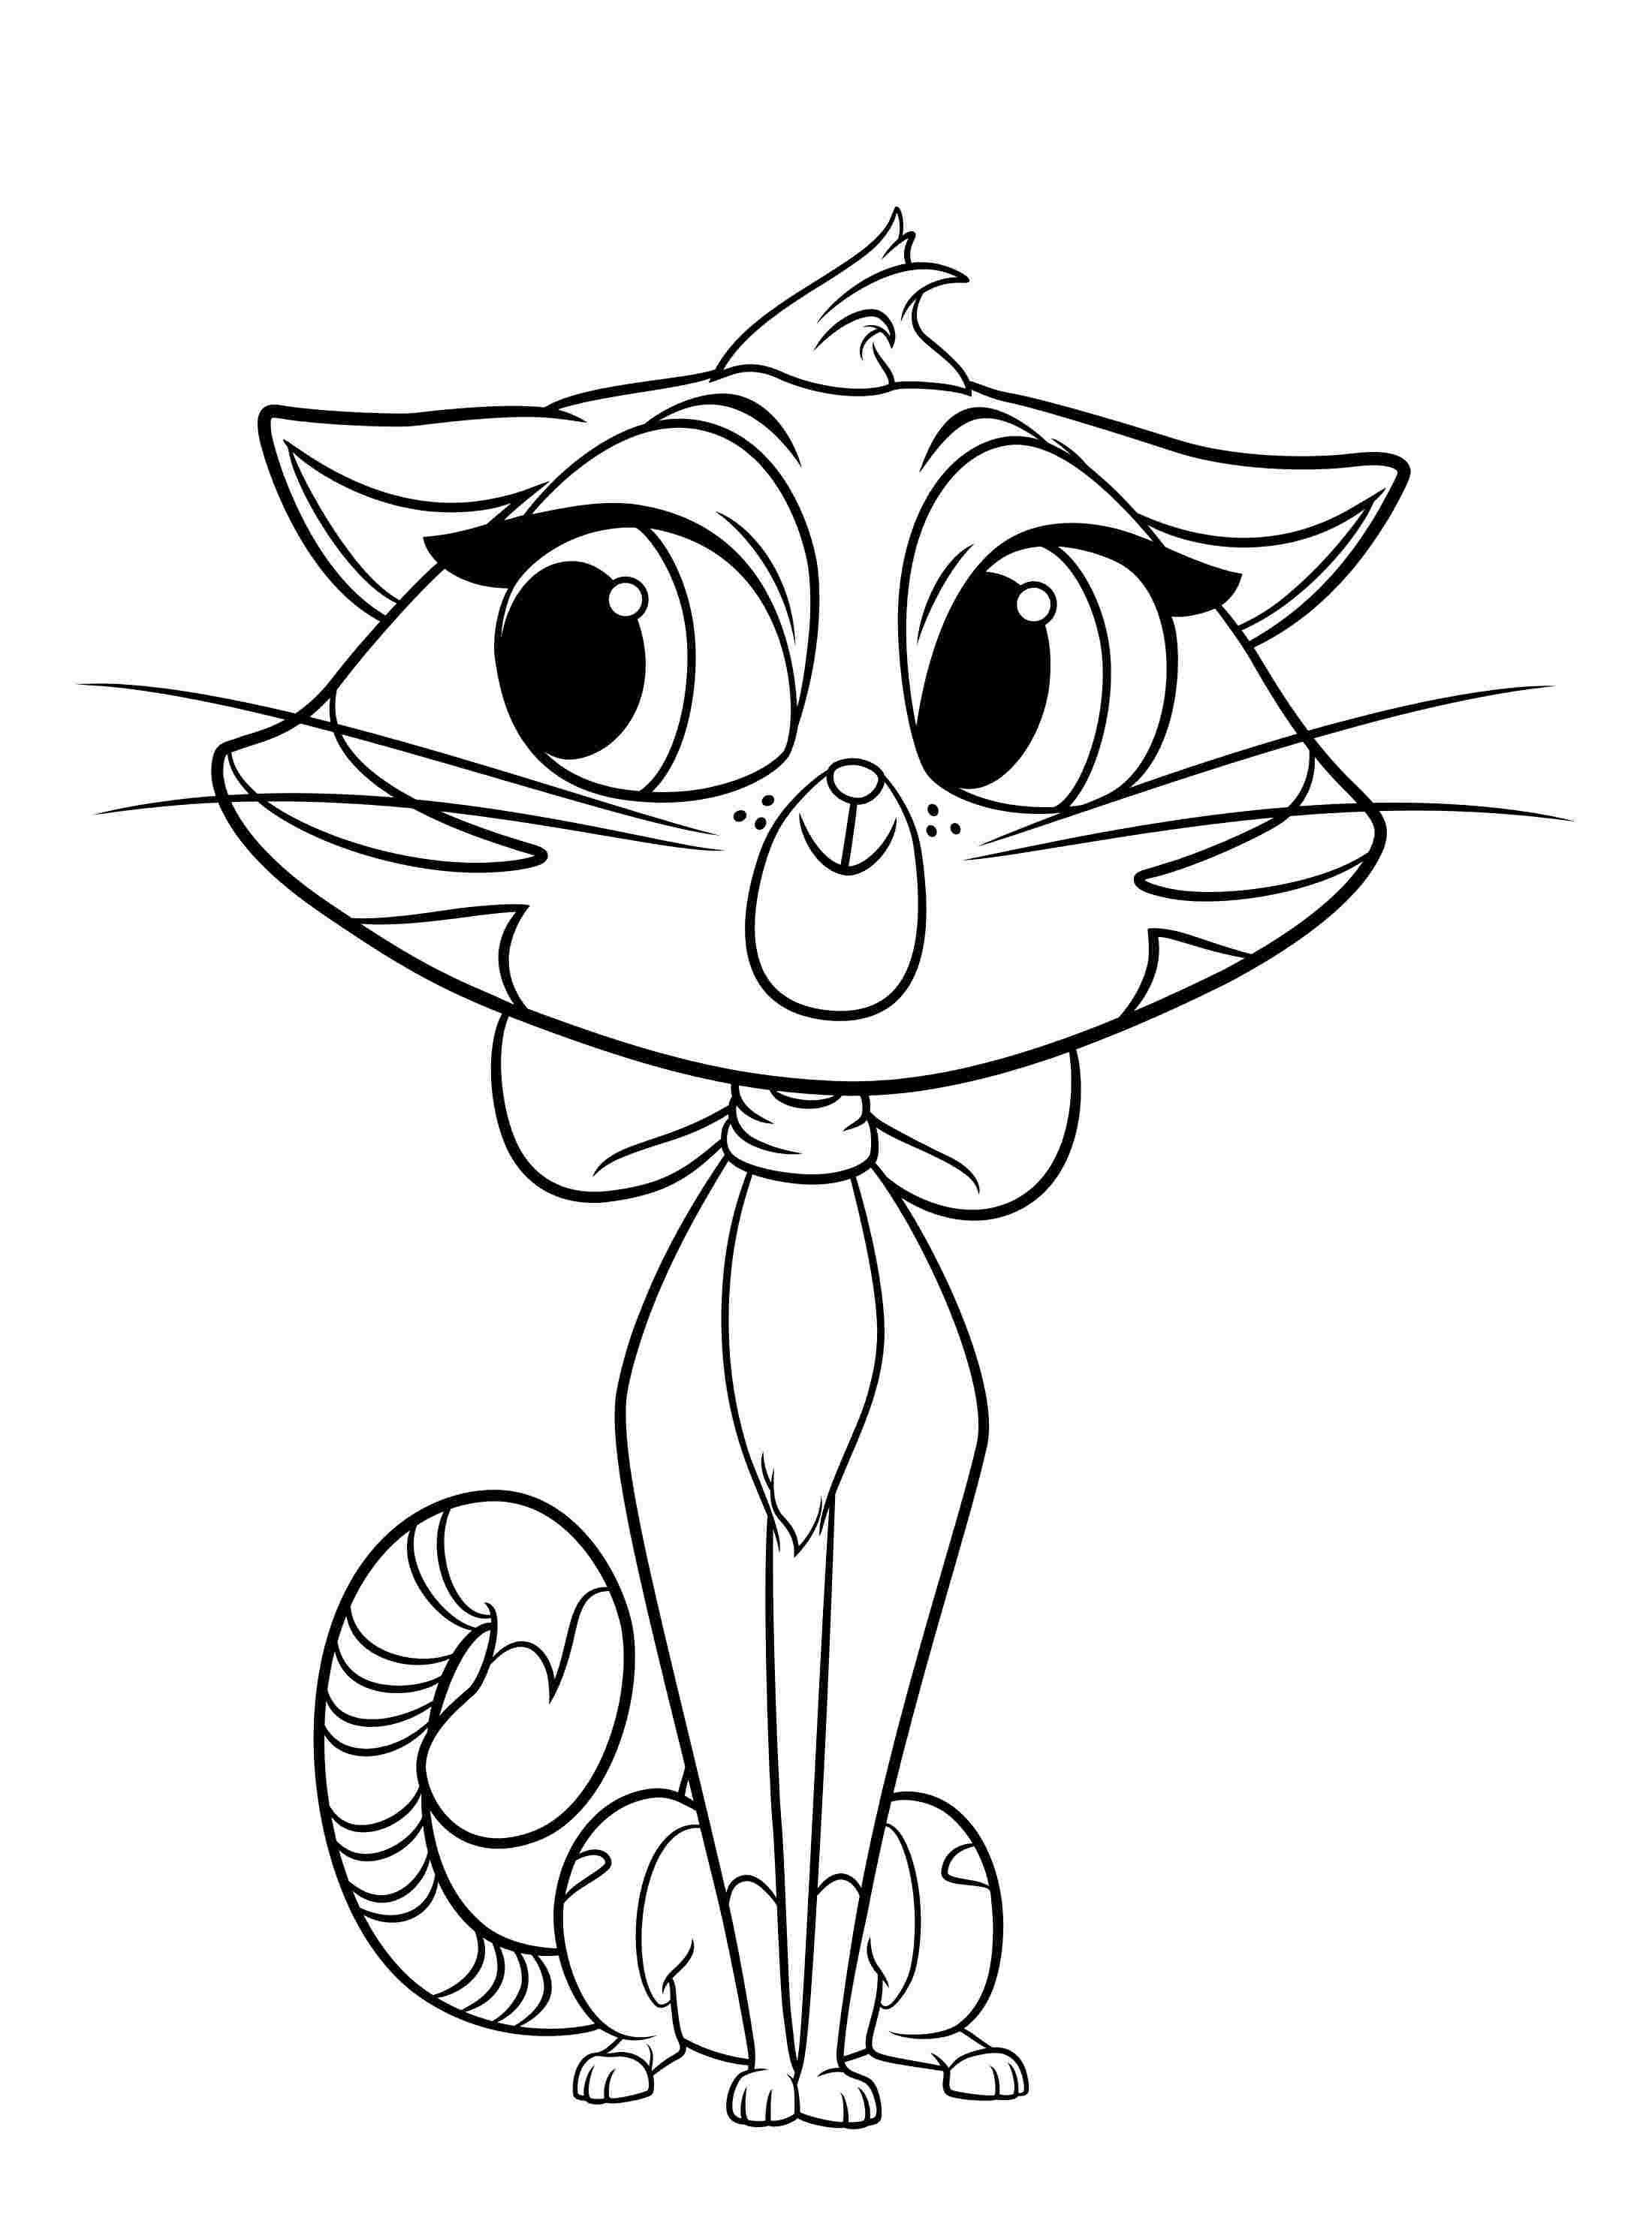 free coloring pages puppy dog pals puppy dog pals coloring pages ...